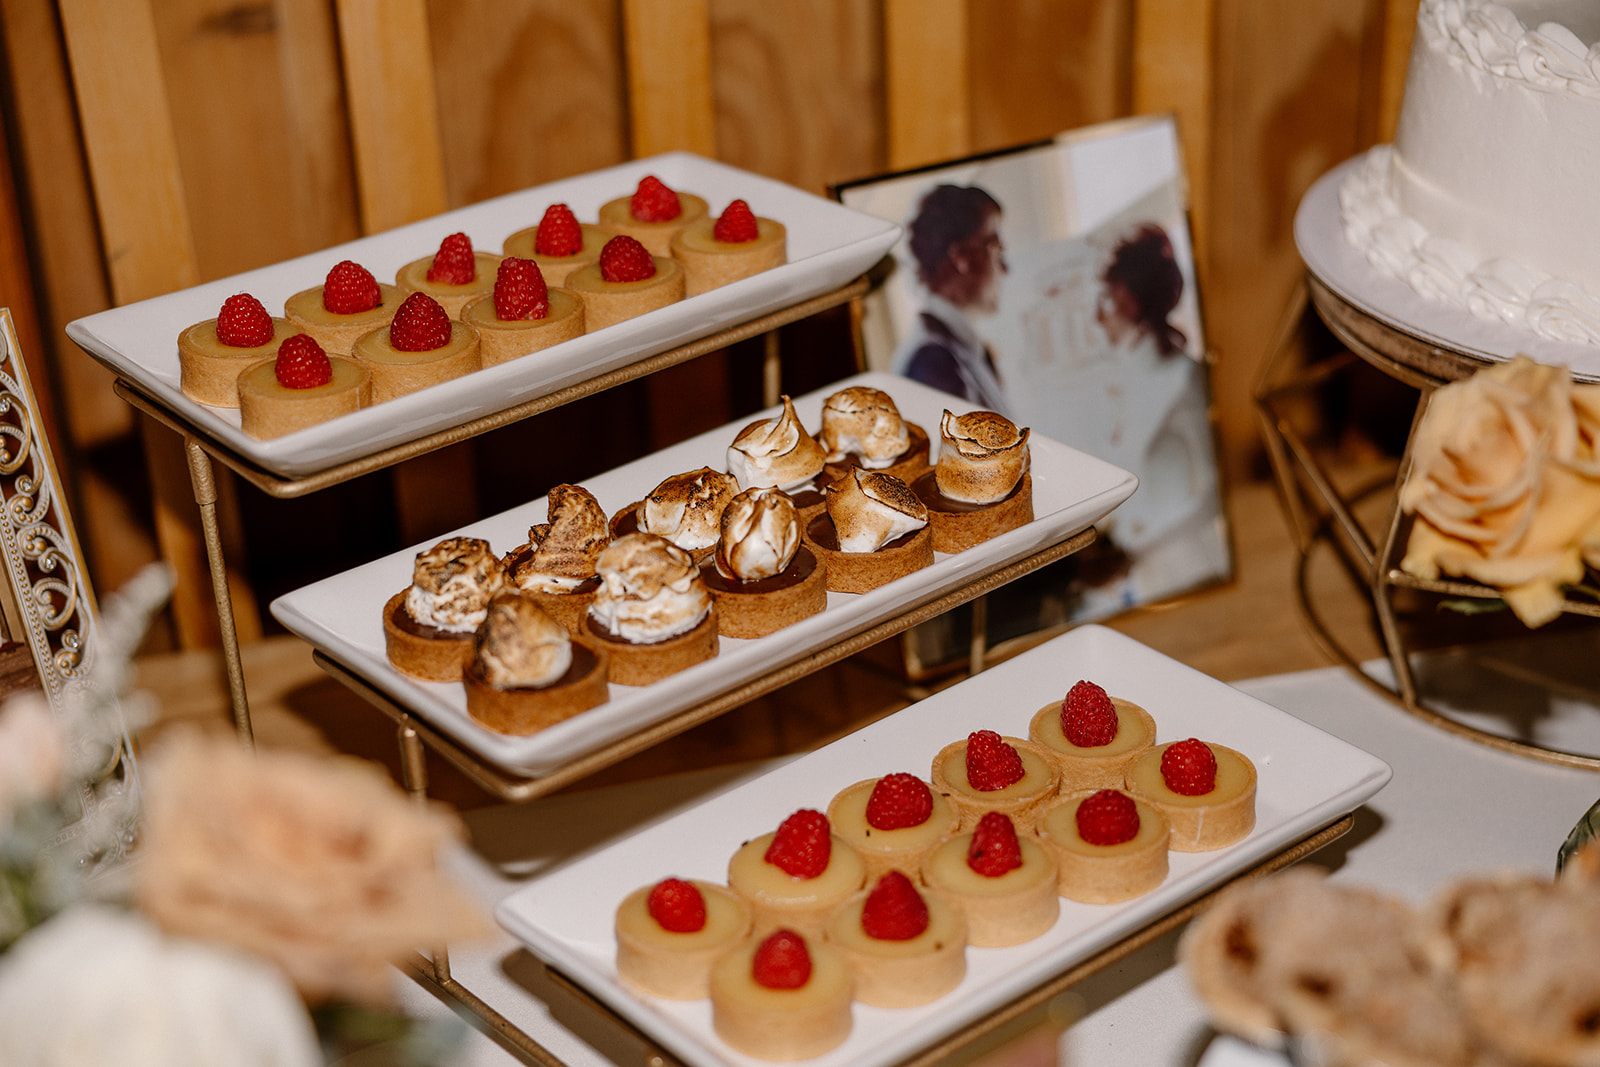 delicious looking desserts sit ready for guests to devour them at the dreamy Arizona desert wedding reception